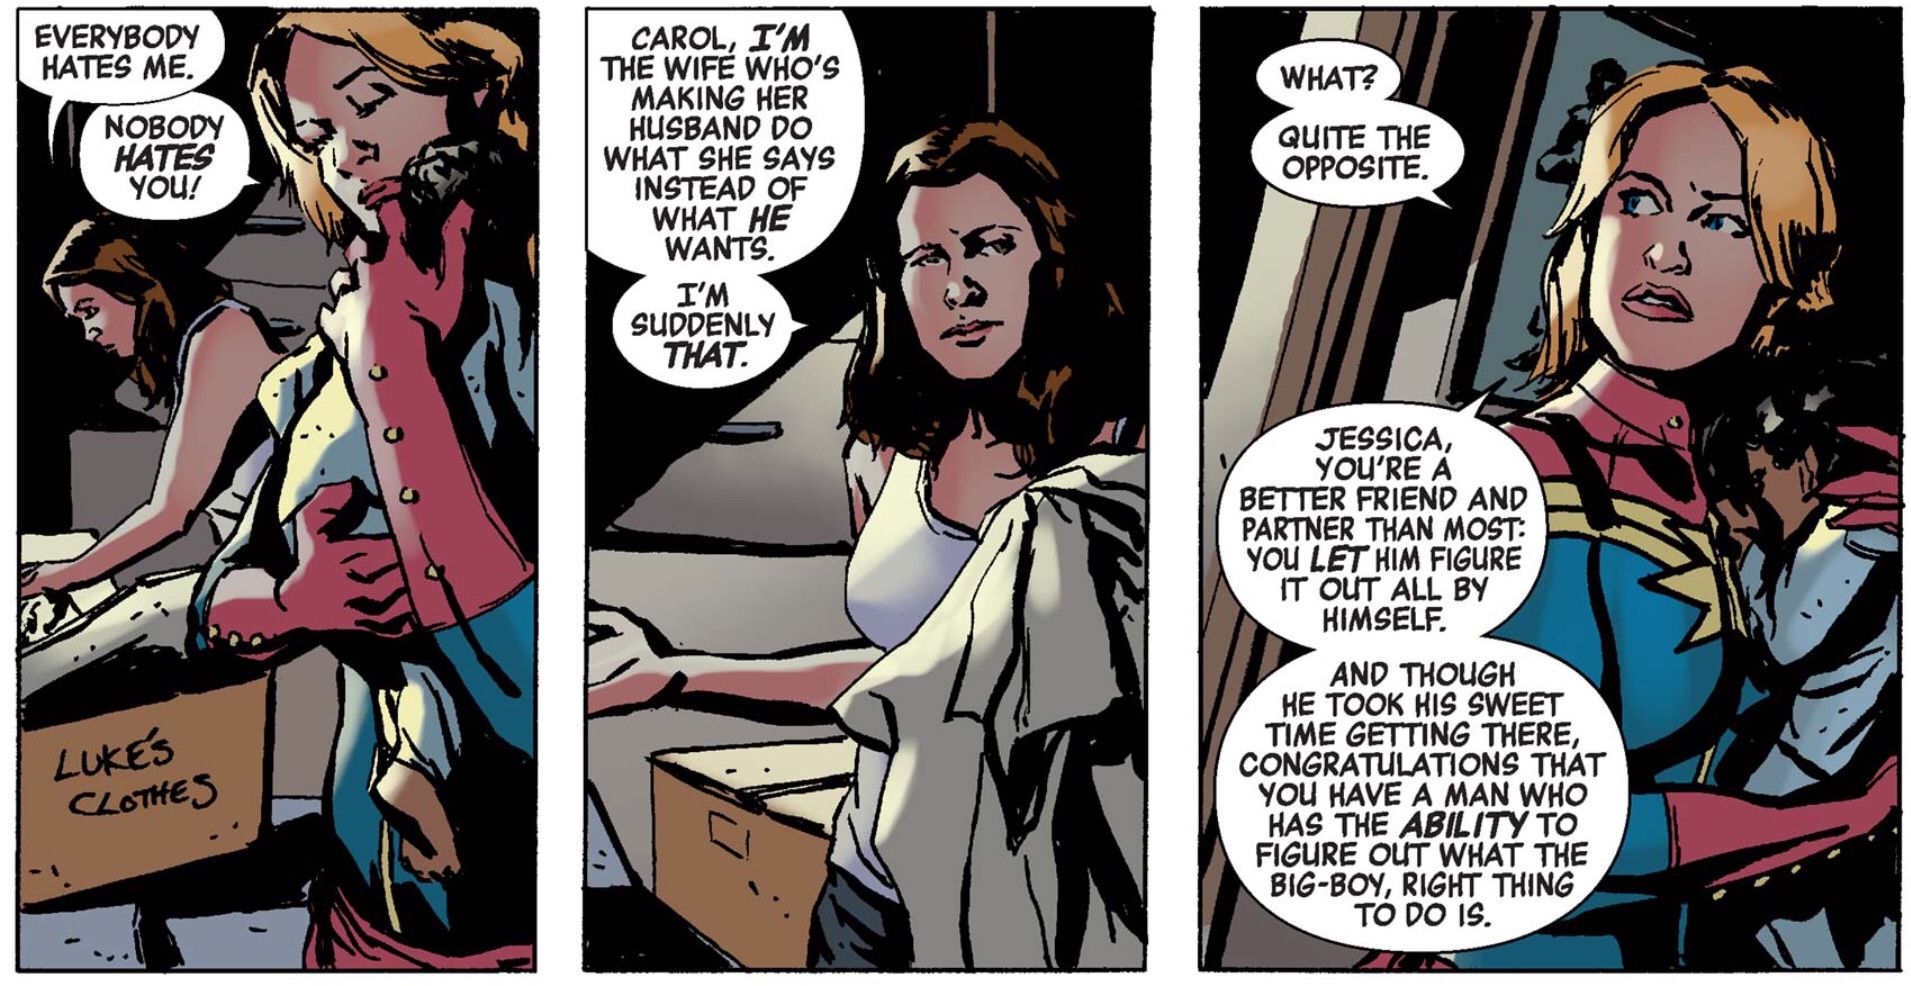 Jessica Jones tells Carol Danvers that she thinks all of the other Avengers hate her because I'm the wife who's making her husband do what she says instead of what he wants. I'm suddenly that.